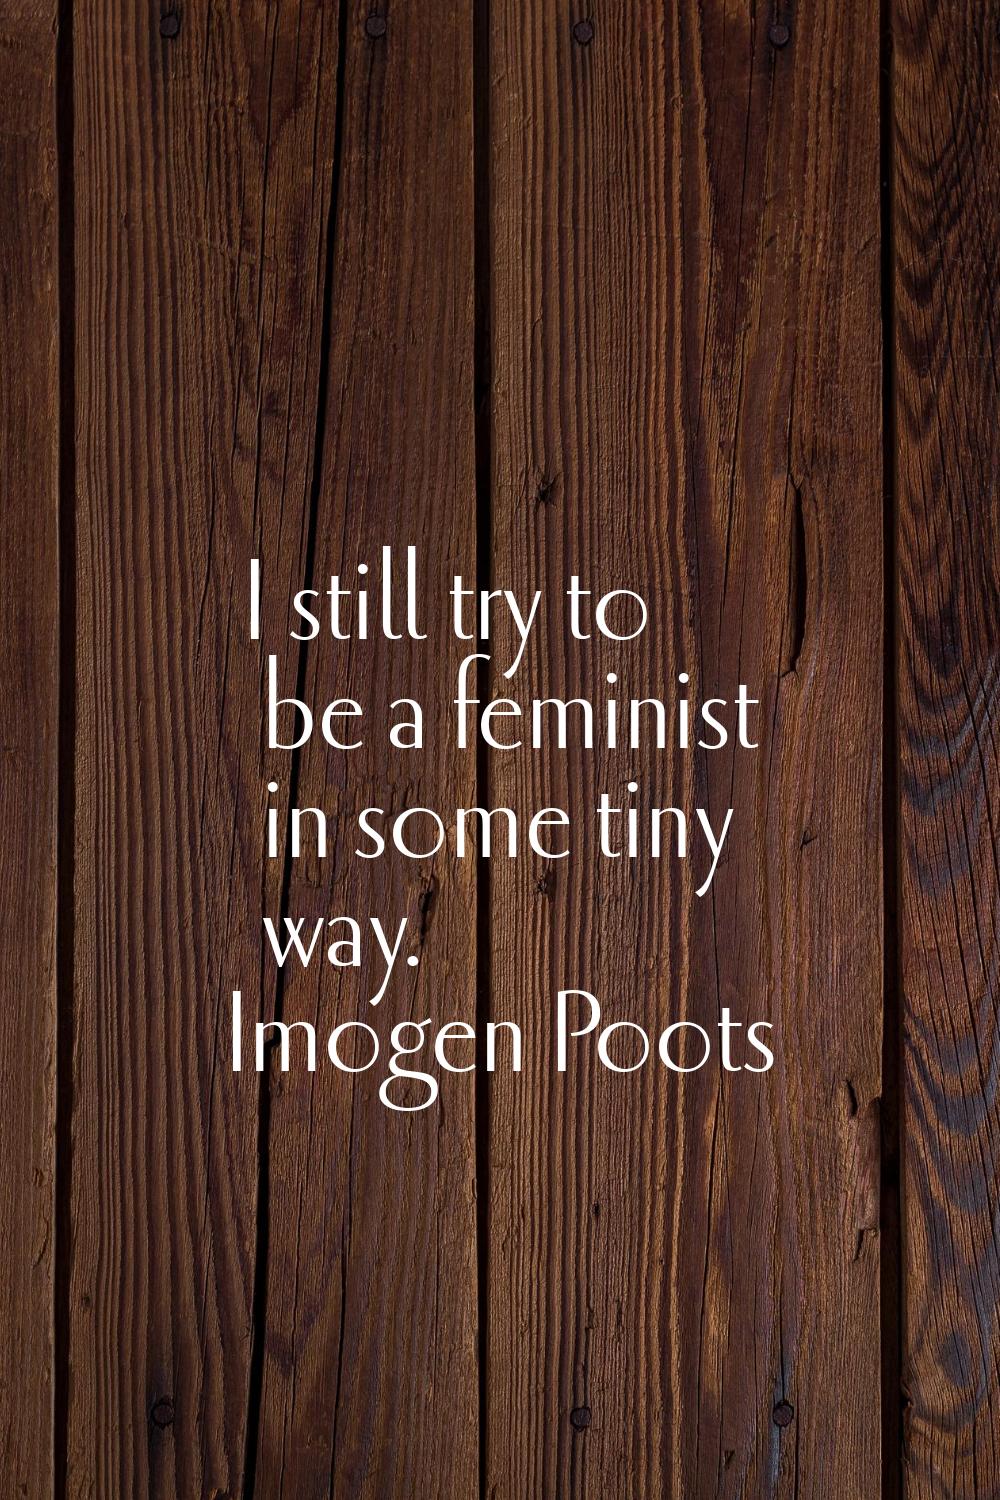 I still try to be a feminist in some tiny way.